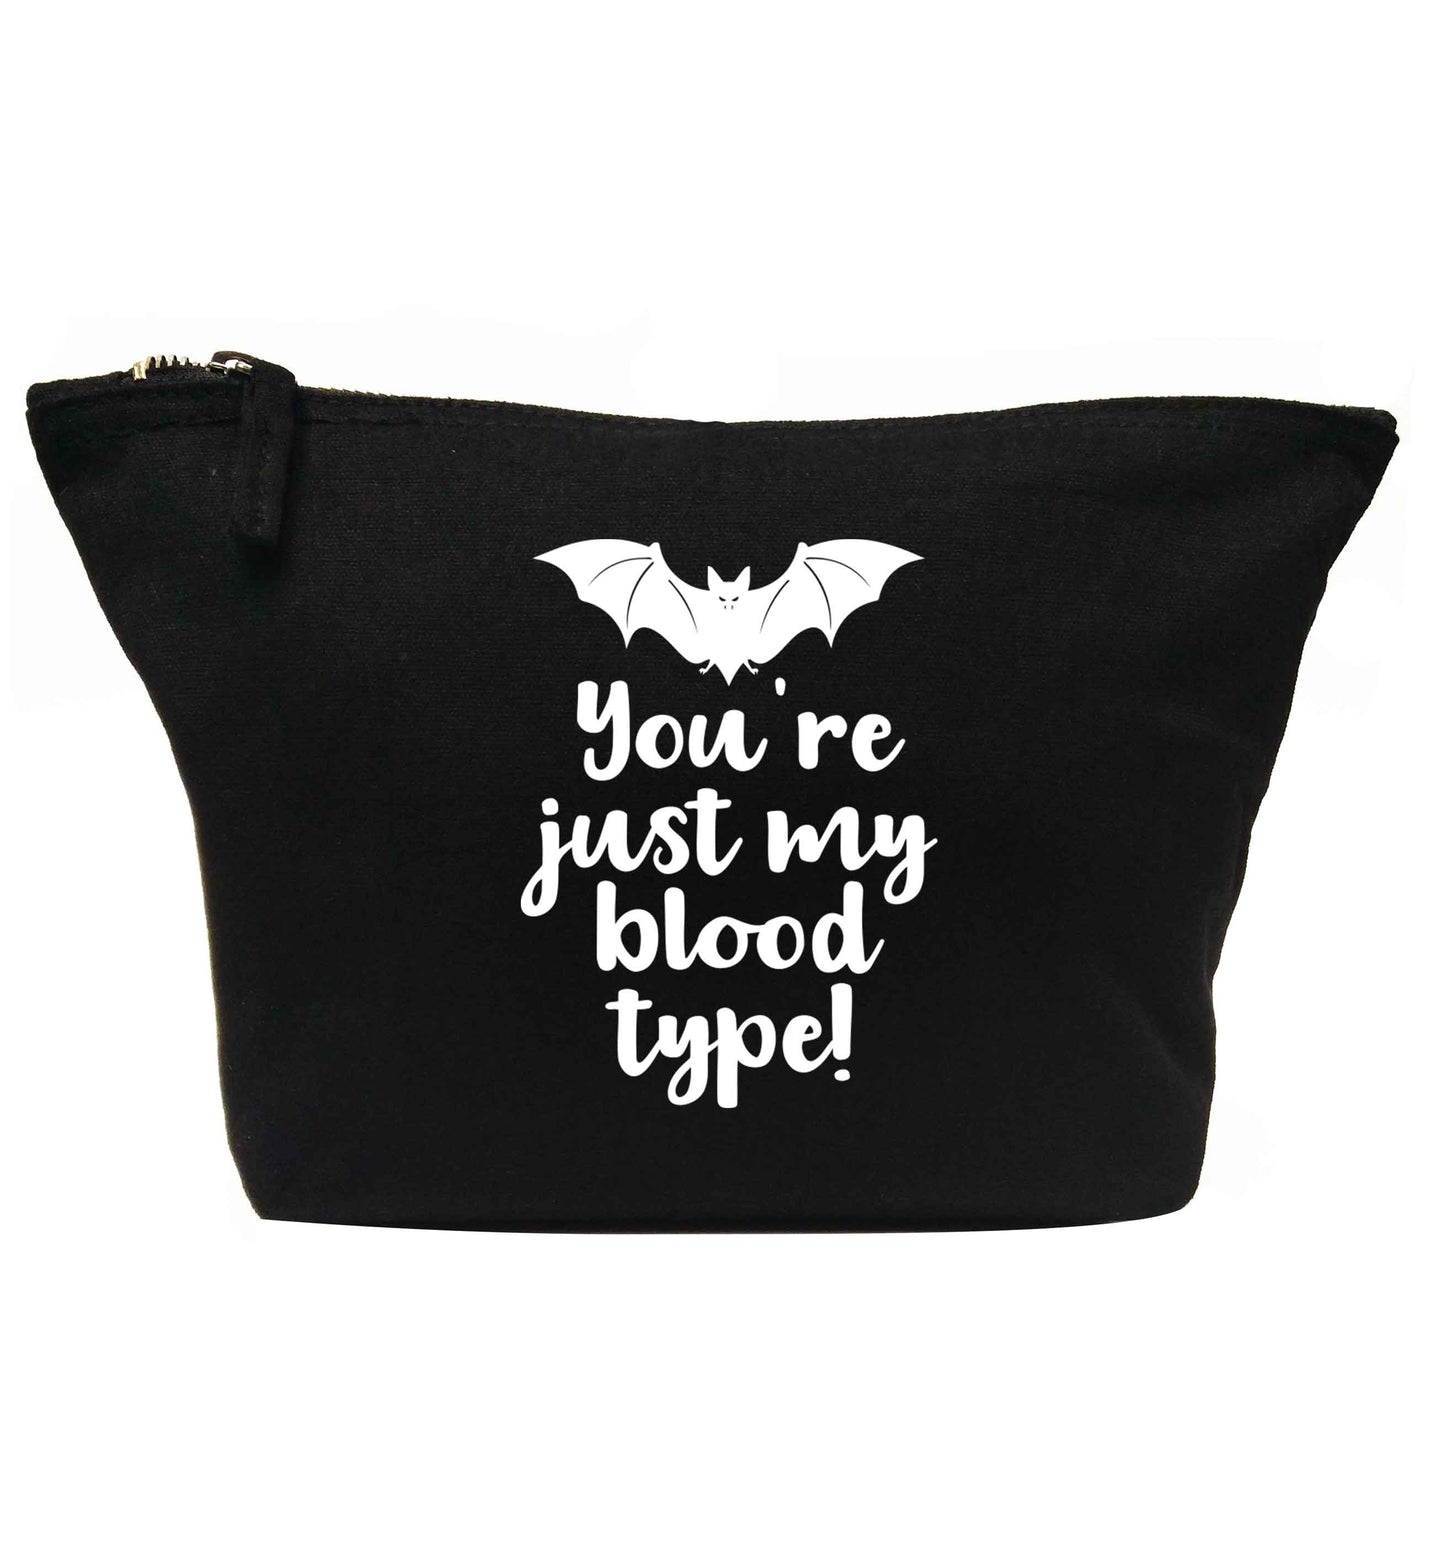 You're just my blood type | Makeup / wash bag